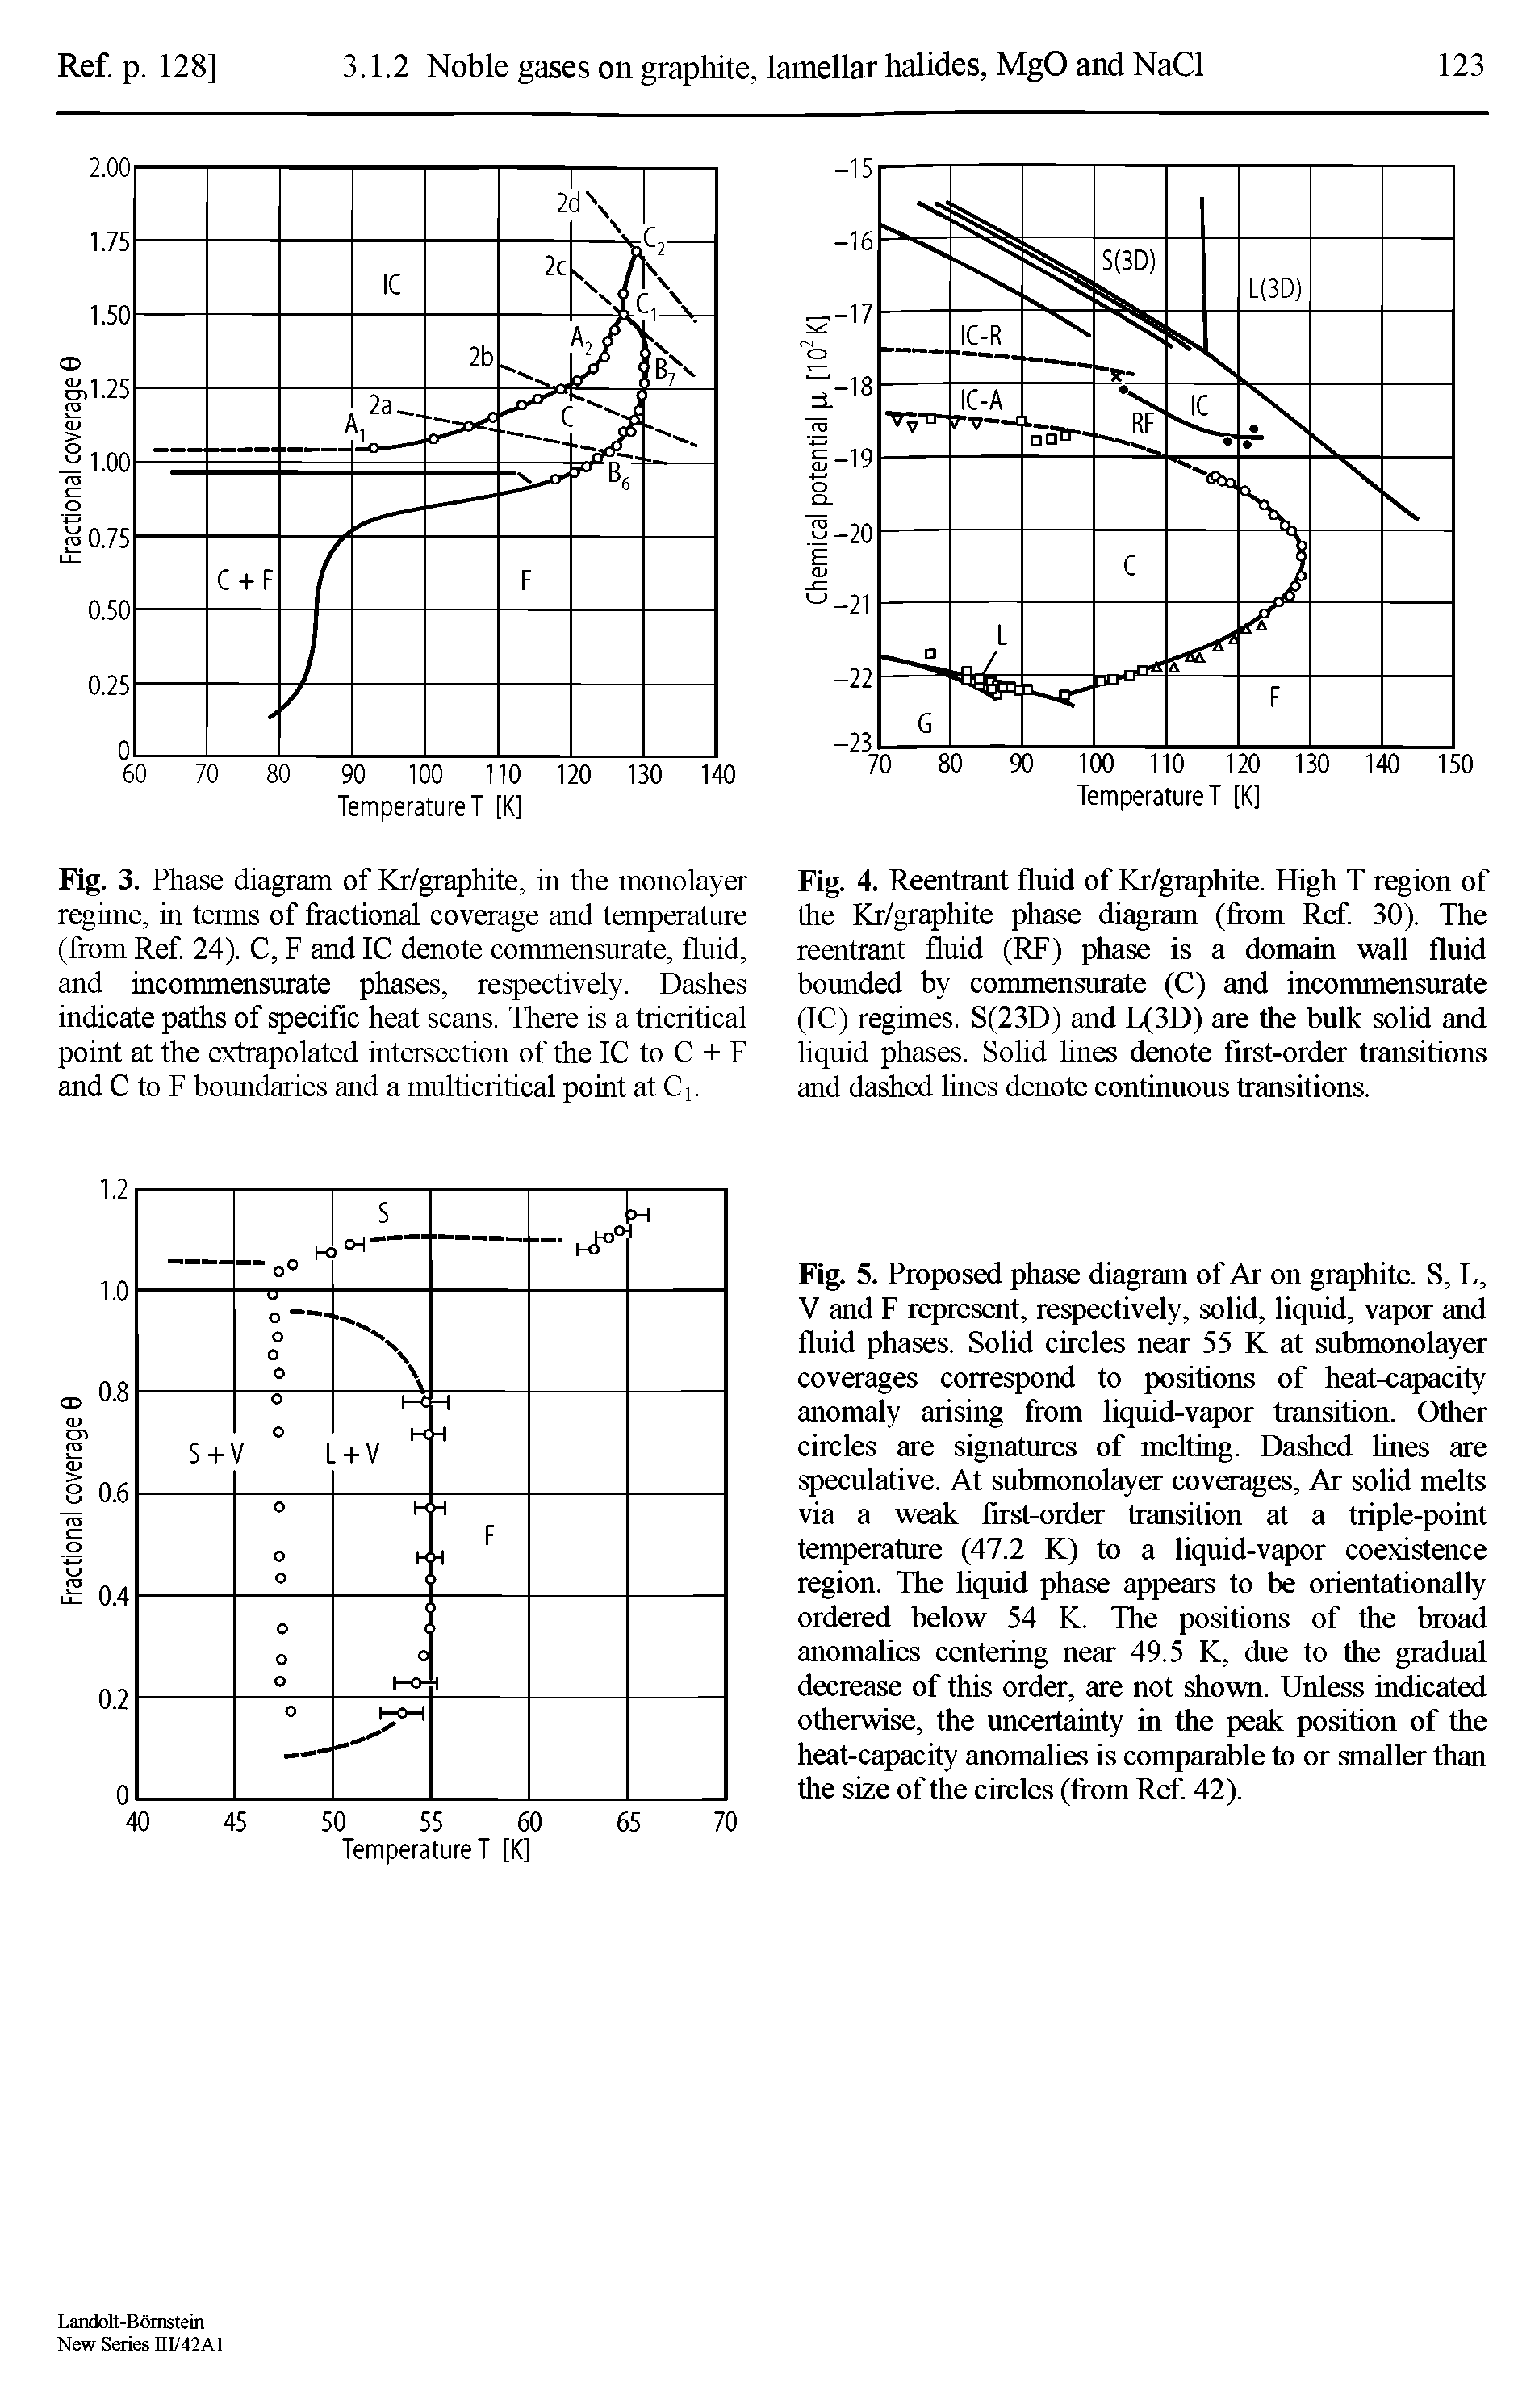 Fig. 5. Proposed phase diagram of Ar on graphite. S, L, V and F represent, respectively, solid, liquid, vapor and fluid phases. Solid circles near 55 K at submonolayer coverages correspond to positions of heat-capacity anomaly arising from liquid-vapor transition. Other circles are signatures of melting. Dashed hnes are speculative. At submonolayer coverages, Ar solid melts via a weak first-order transition at a triple-point temperature (47.2 K) to a liquid-vapor coexistence region. The liquid phase appears to be orientationally ordered below 54 K. The positions of the broad anomalies centering near 49.5 K, due to the gradual decrease of this order, are not shown. Unless indicated otherwise, the uncertainty in the peak position of the heat-capacity anomaUes is comparable to or smaller than the size of the circles (from Ref 42).